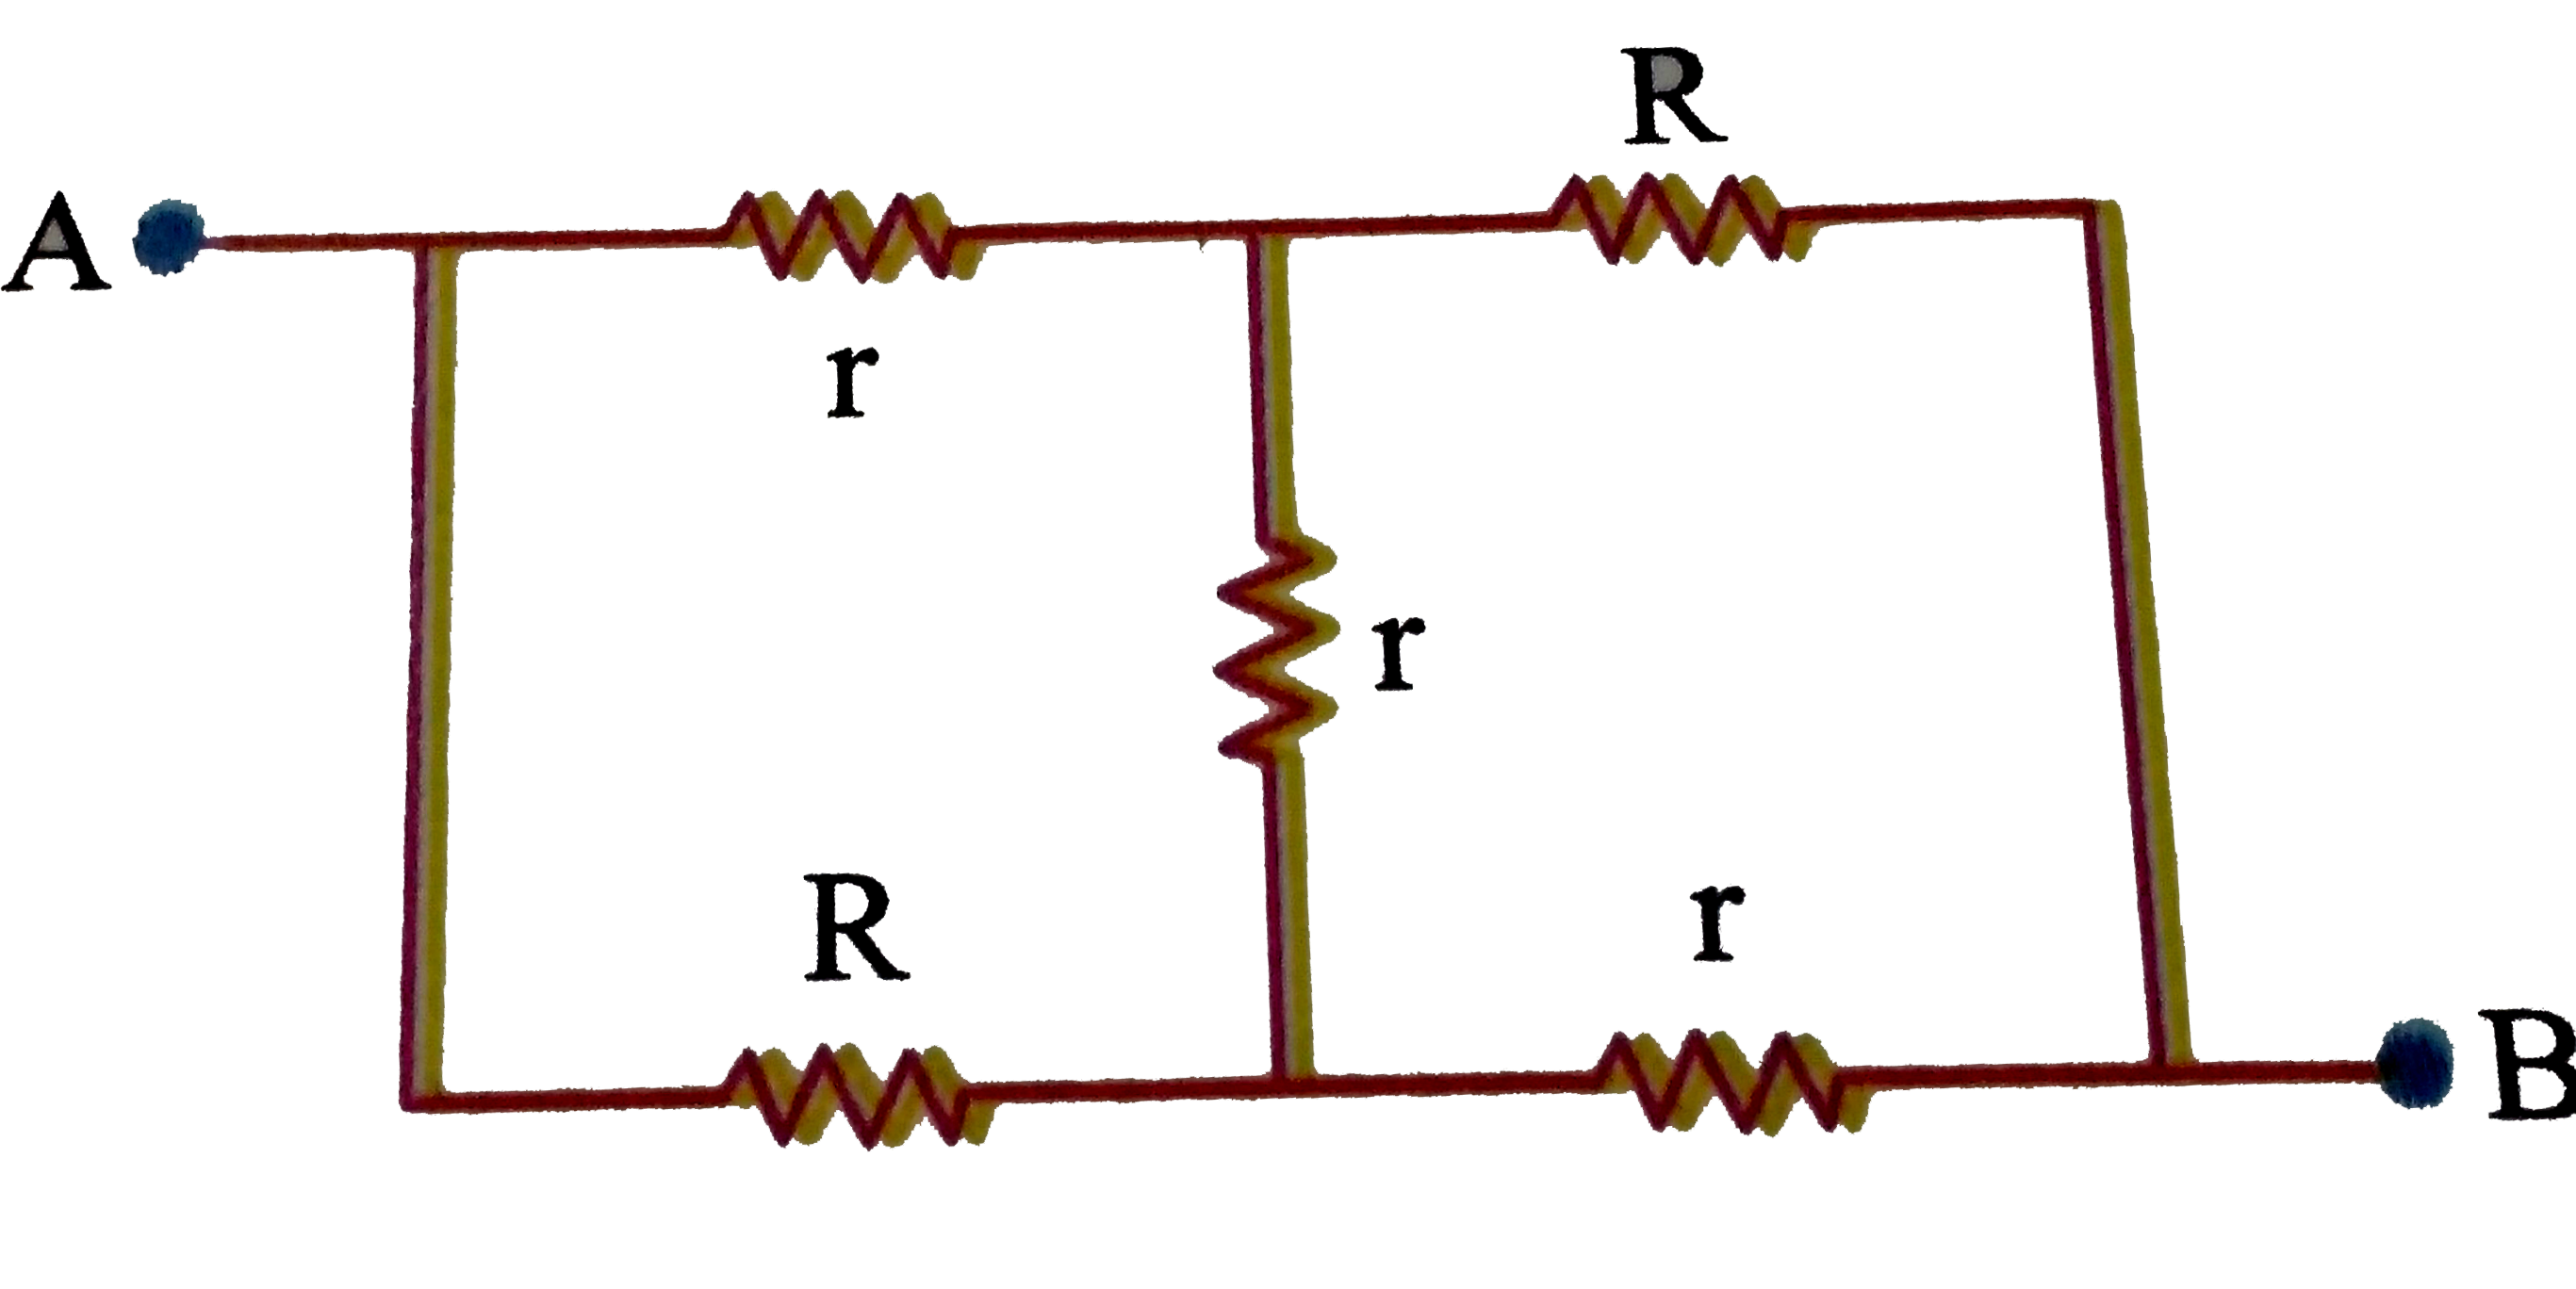 Equivalent resistace across A and B in the given circuit if r=10Omega,R=20Omega is